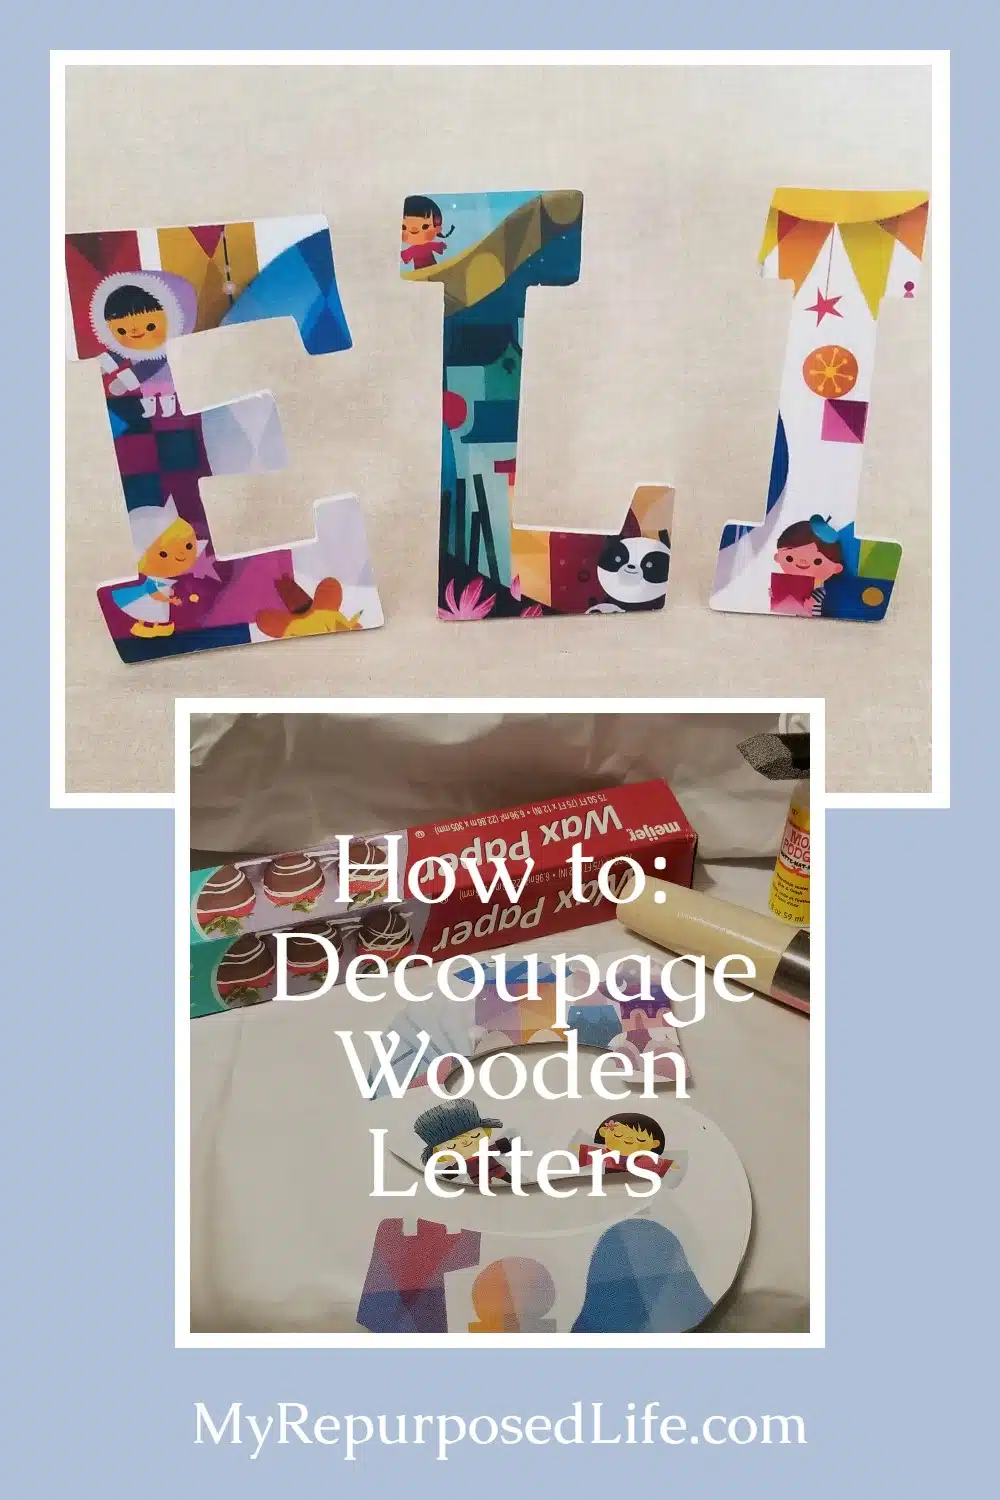 How to decoupage wooden letters for a baby shower or nursery. Tips for the decoupage, and DIY small easels to display the wooden letters. #MyRepurposedLife #diy #decoupage via @repurposedlife